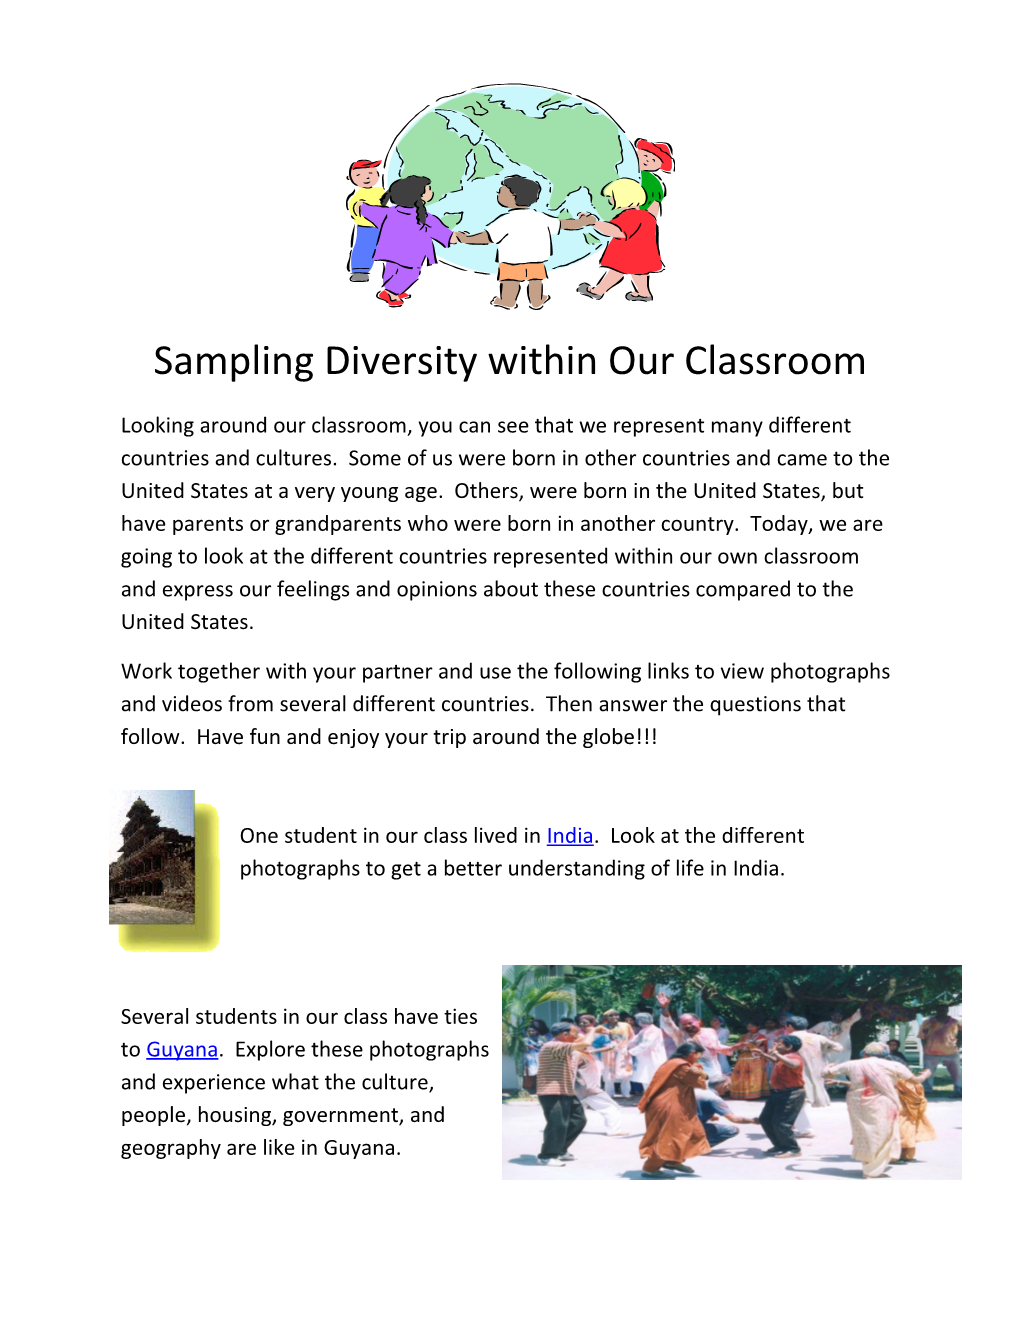 Sampling Diversity Within Our Classroom